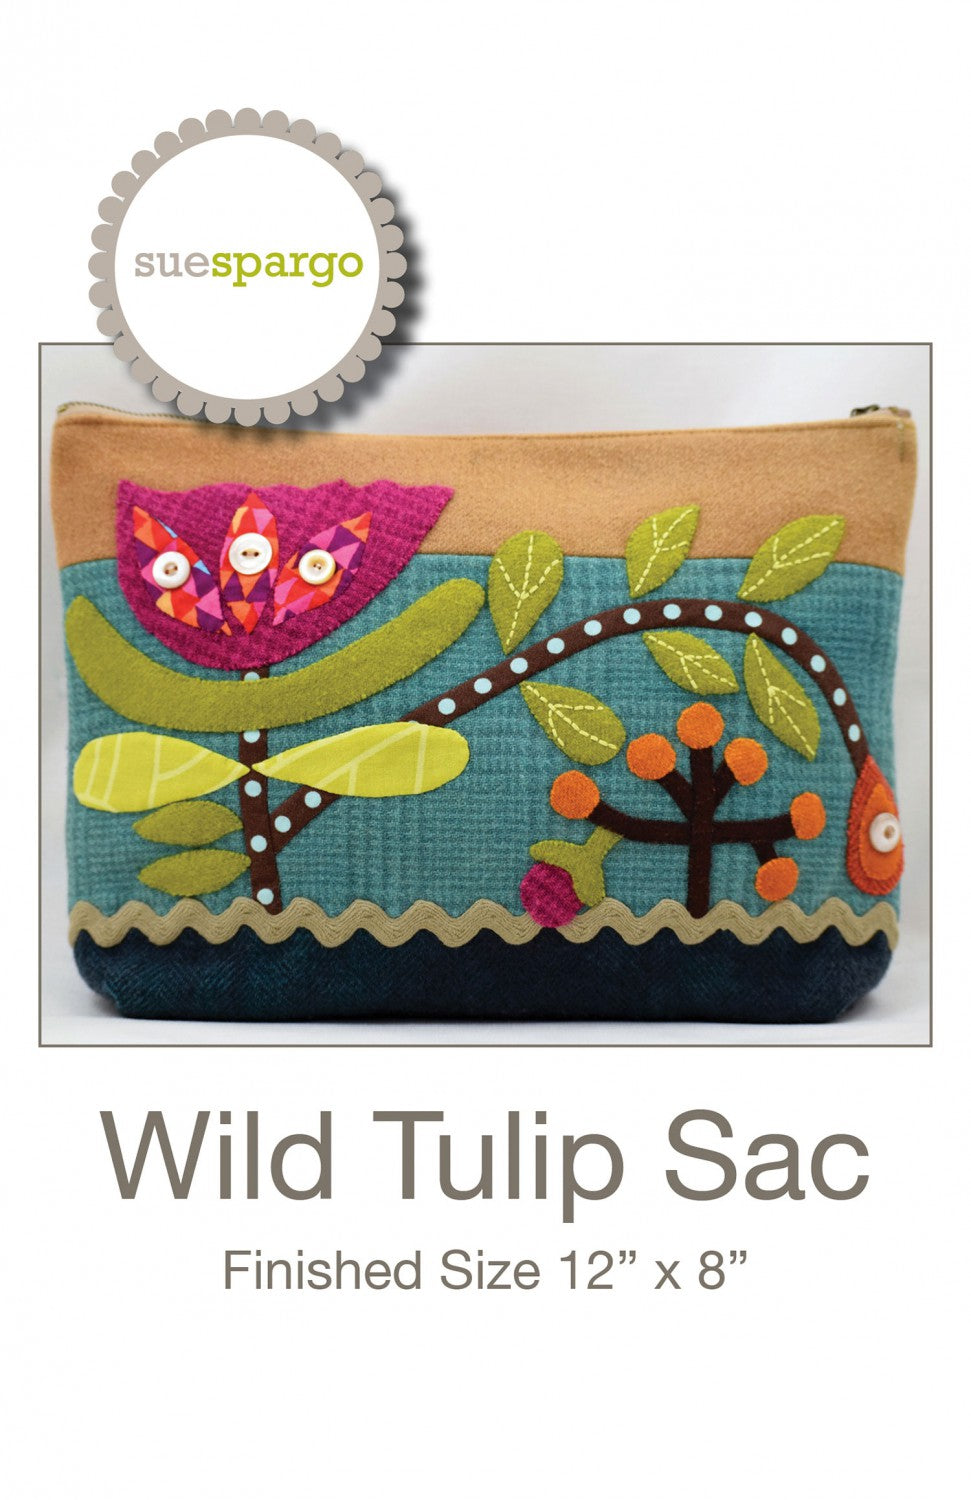 Wild Tulip Sac - Applique, Embroidery, and Sewing Pattern by Sue Spargo of Folk Art Quilts